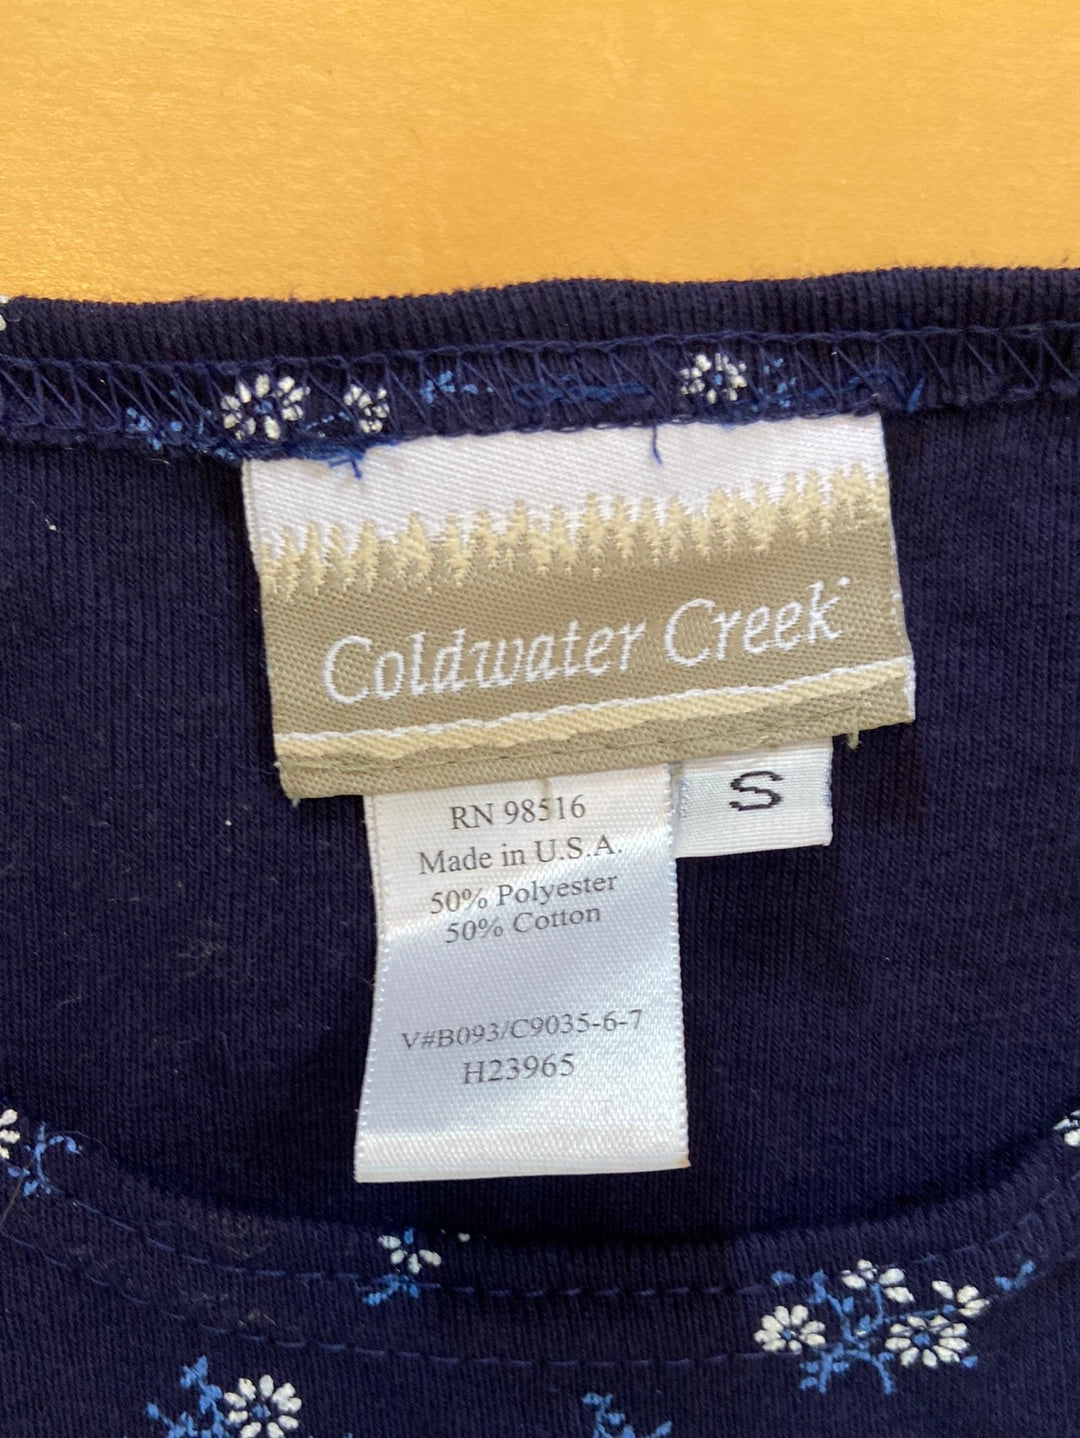 NAVY TWO PIECE Coldwater Creek Size S